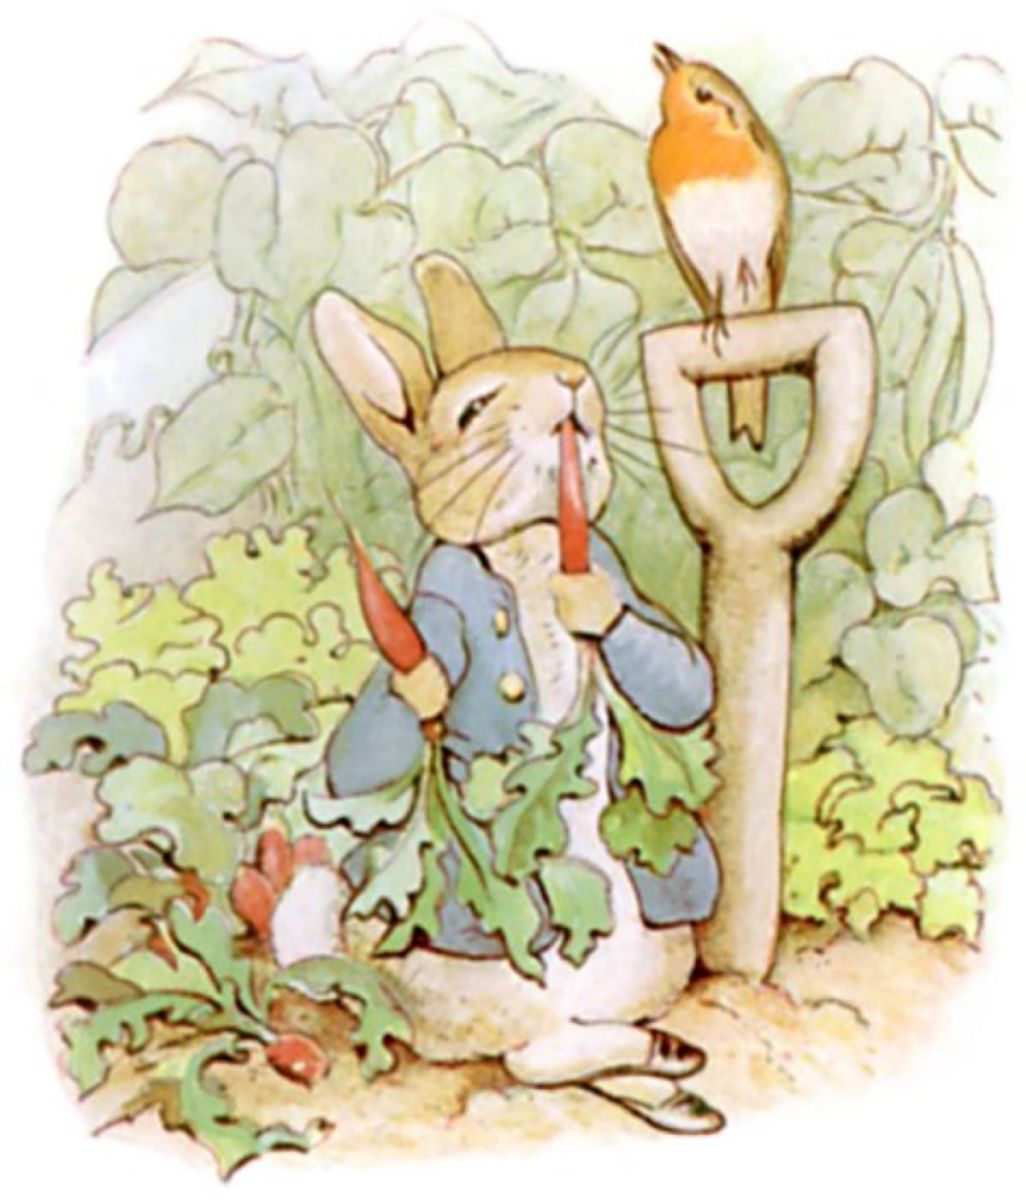 Arguably Beatrix Potter's best known character Peter Rabbit, here he's helping himself to Mr. McGregor's carrots. 